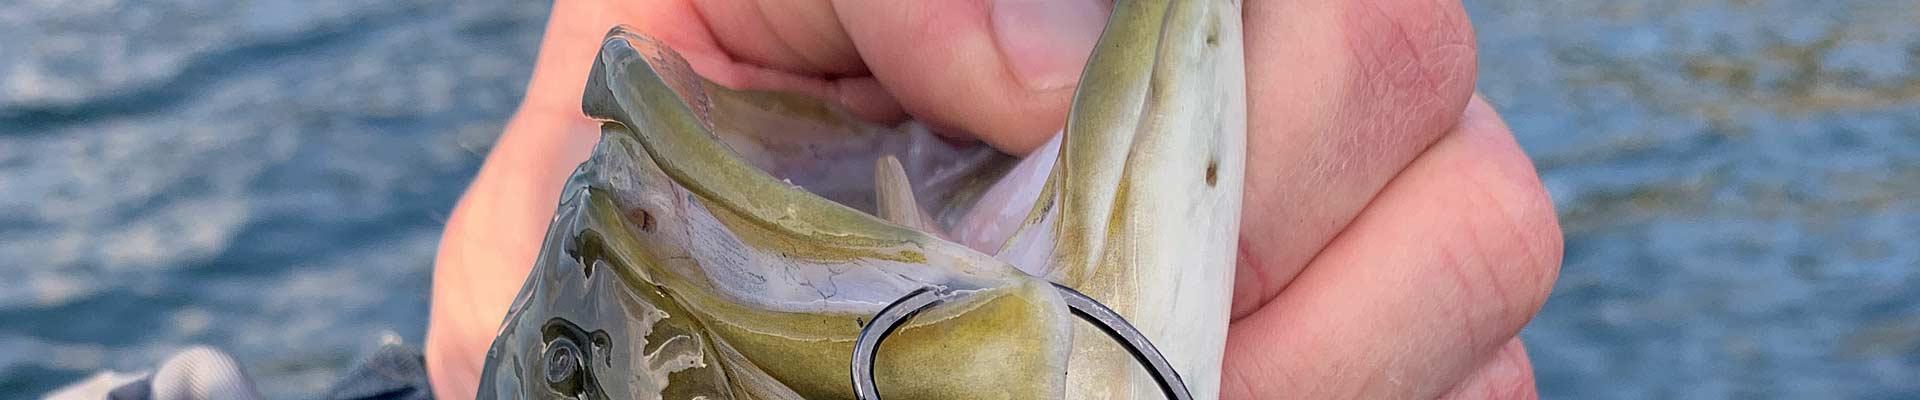 How to Fish a Floating Worm on Cover for Bass - Tips & Catches